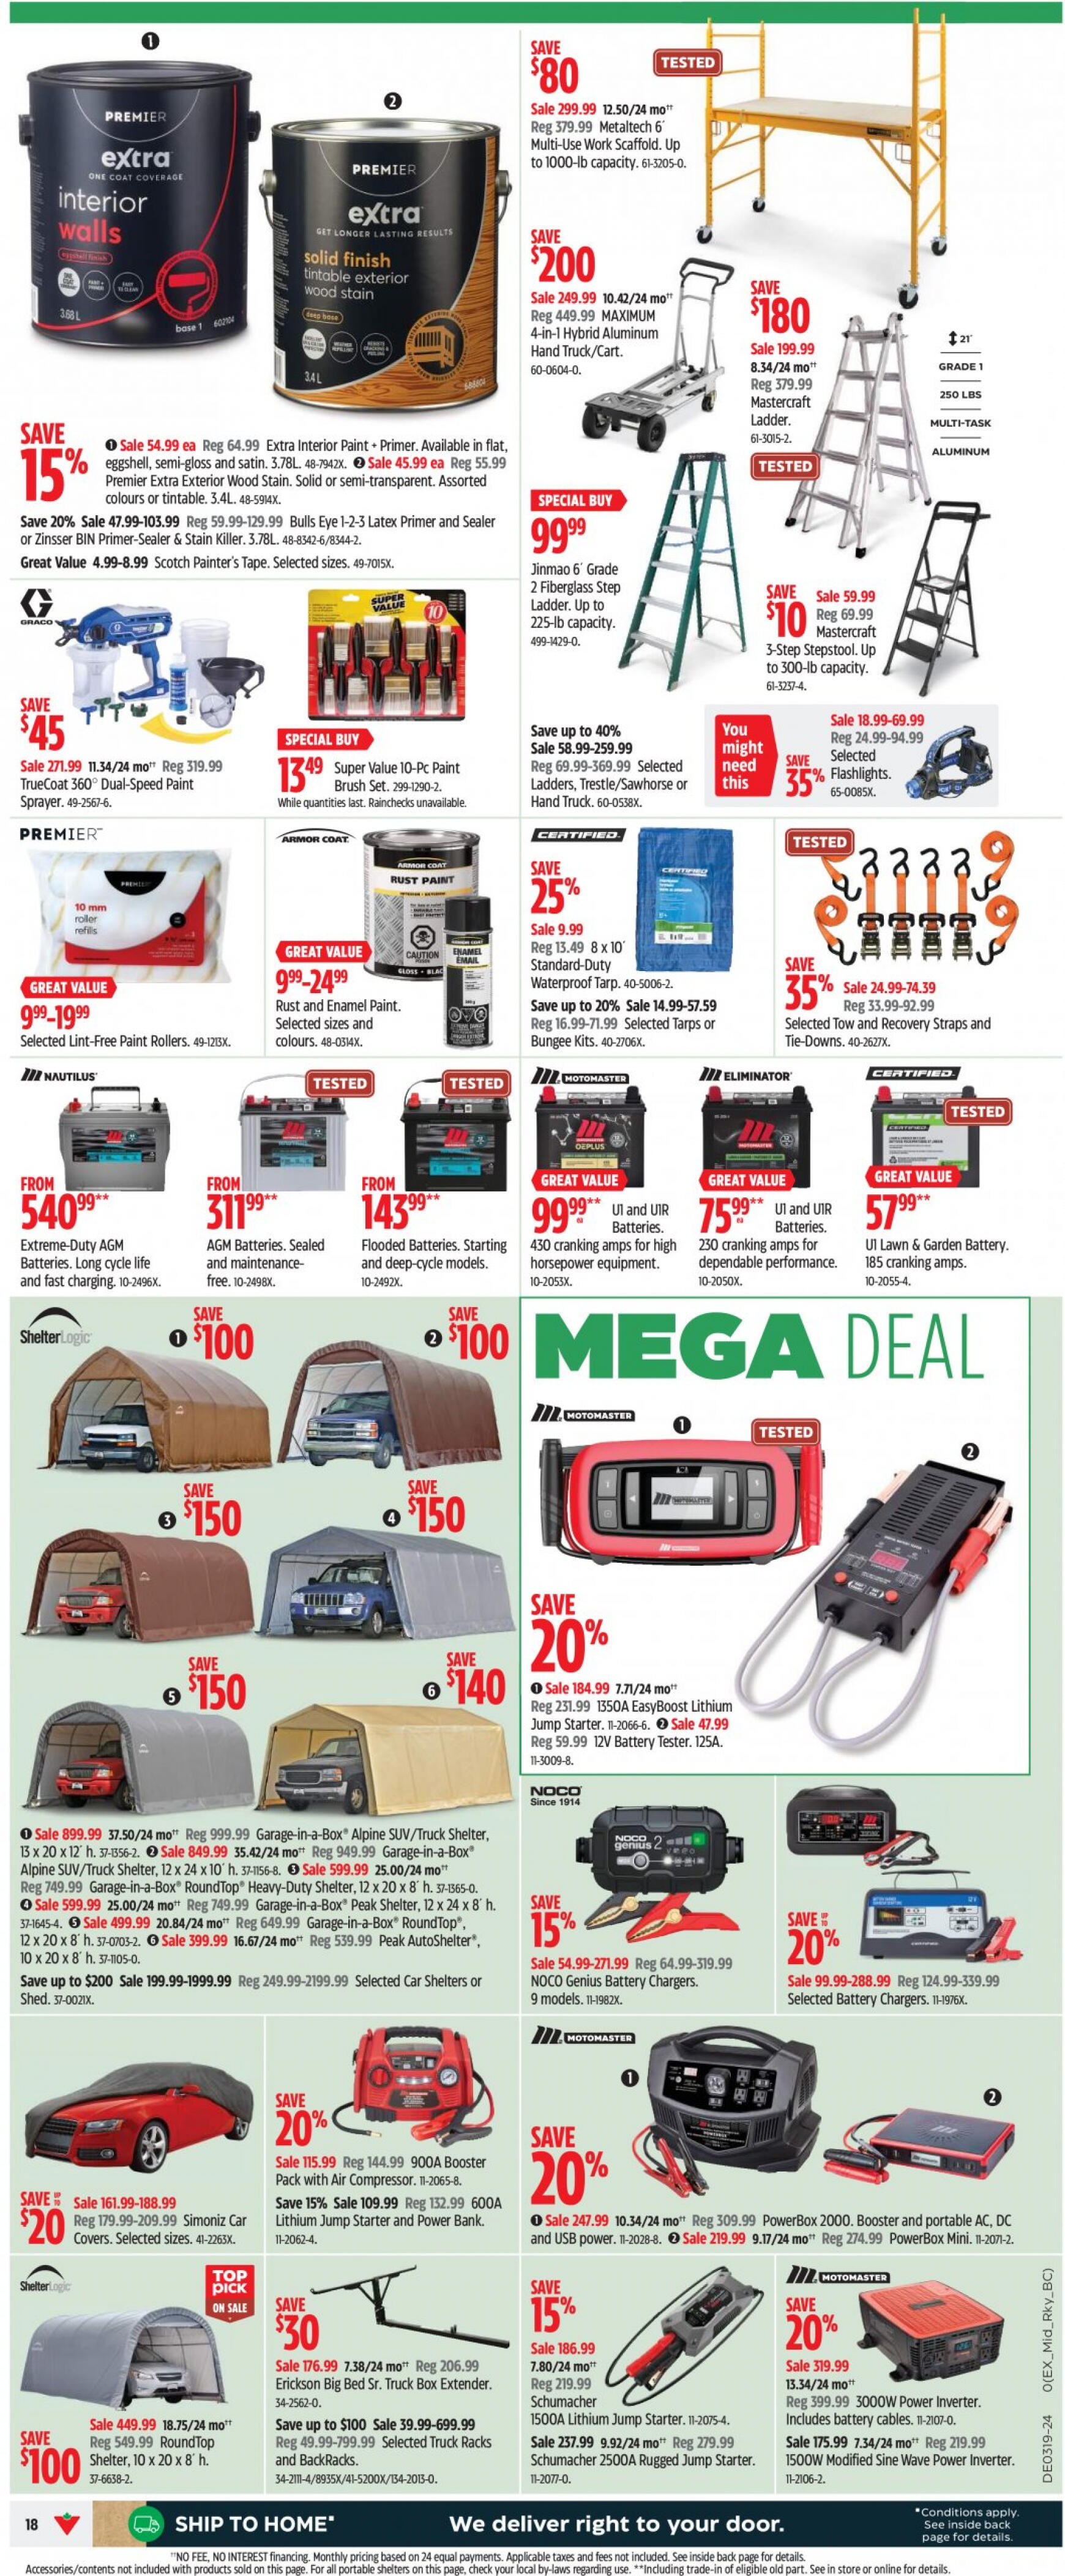 canadian-tire - Canadian Tire flyer current 02.05. - 08.05. - page: 17